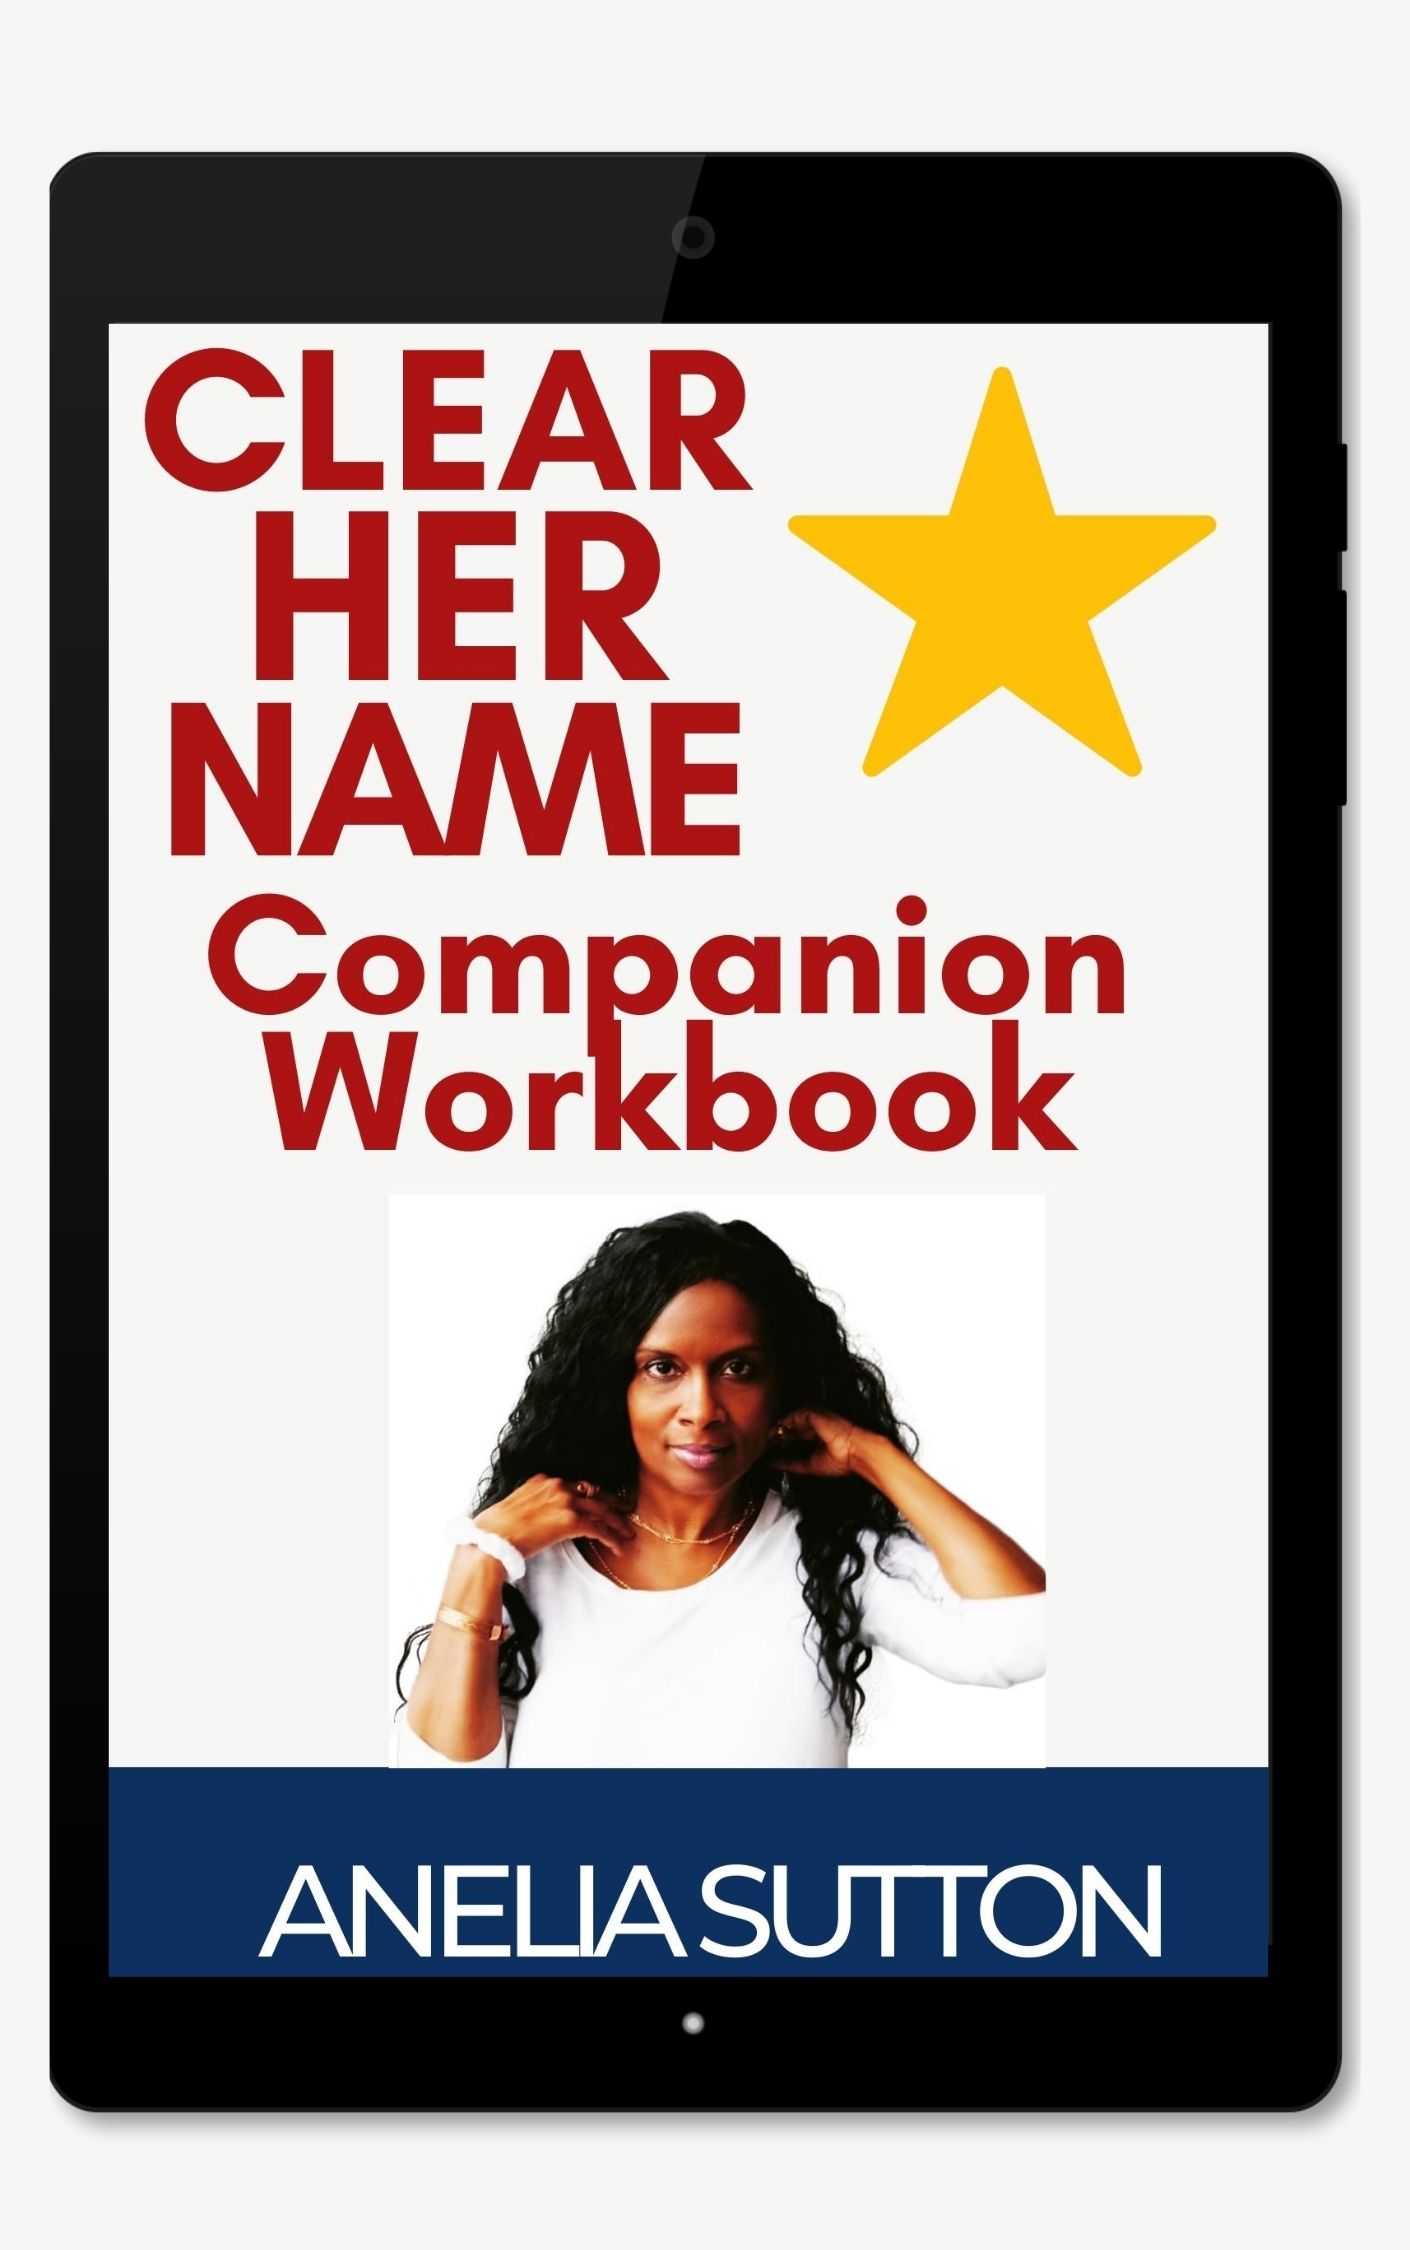 CLEAR HER NAME COMPANION WORKBOOK- tablet